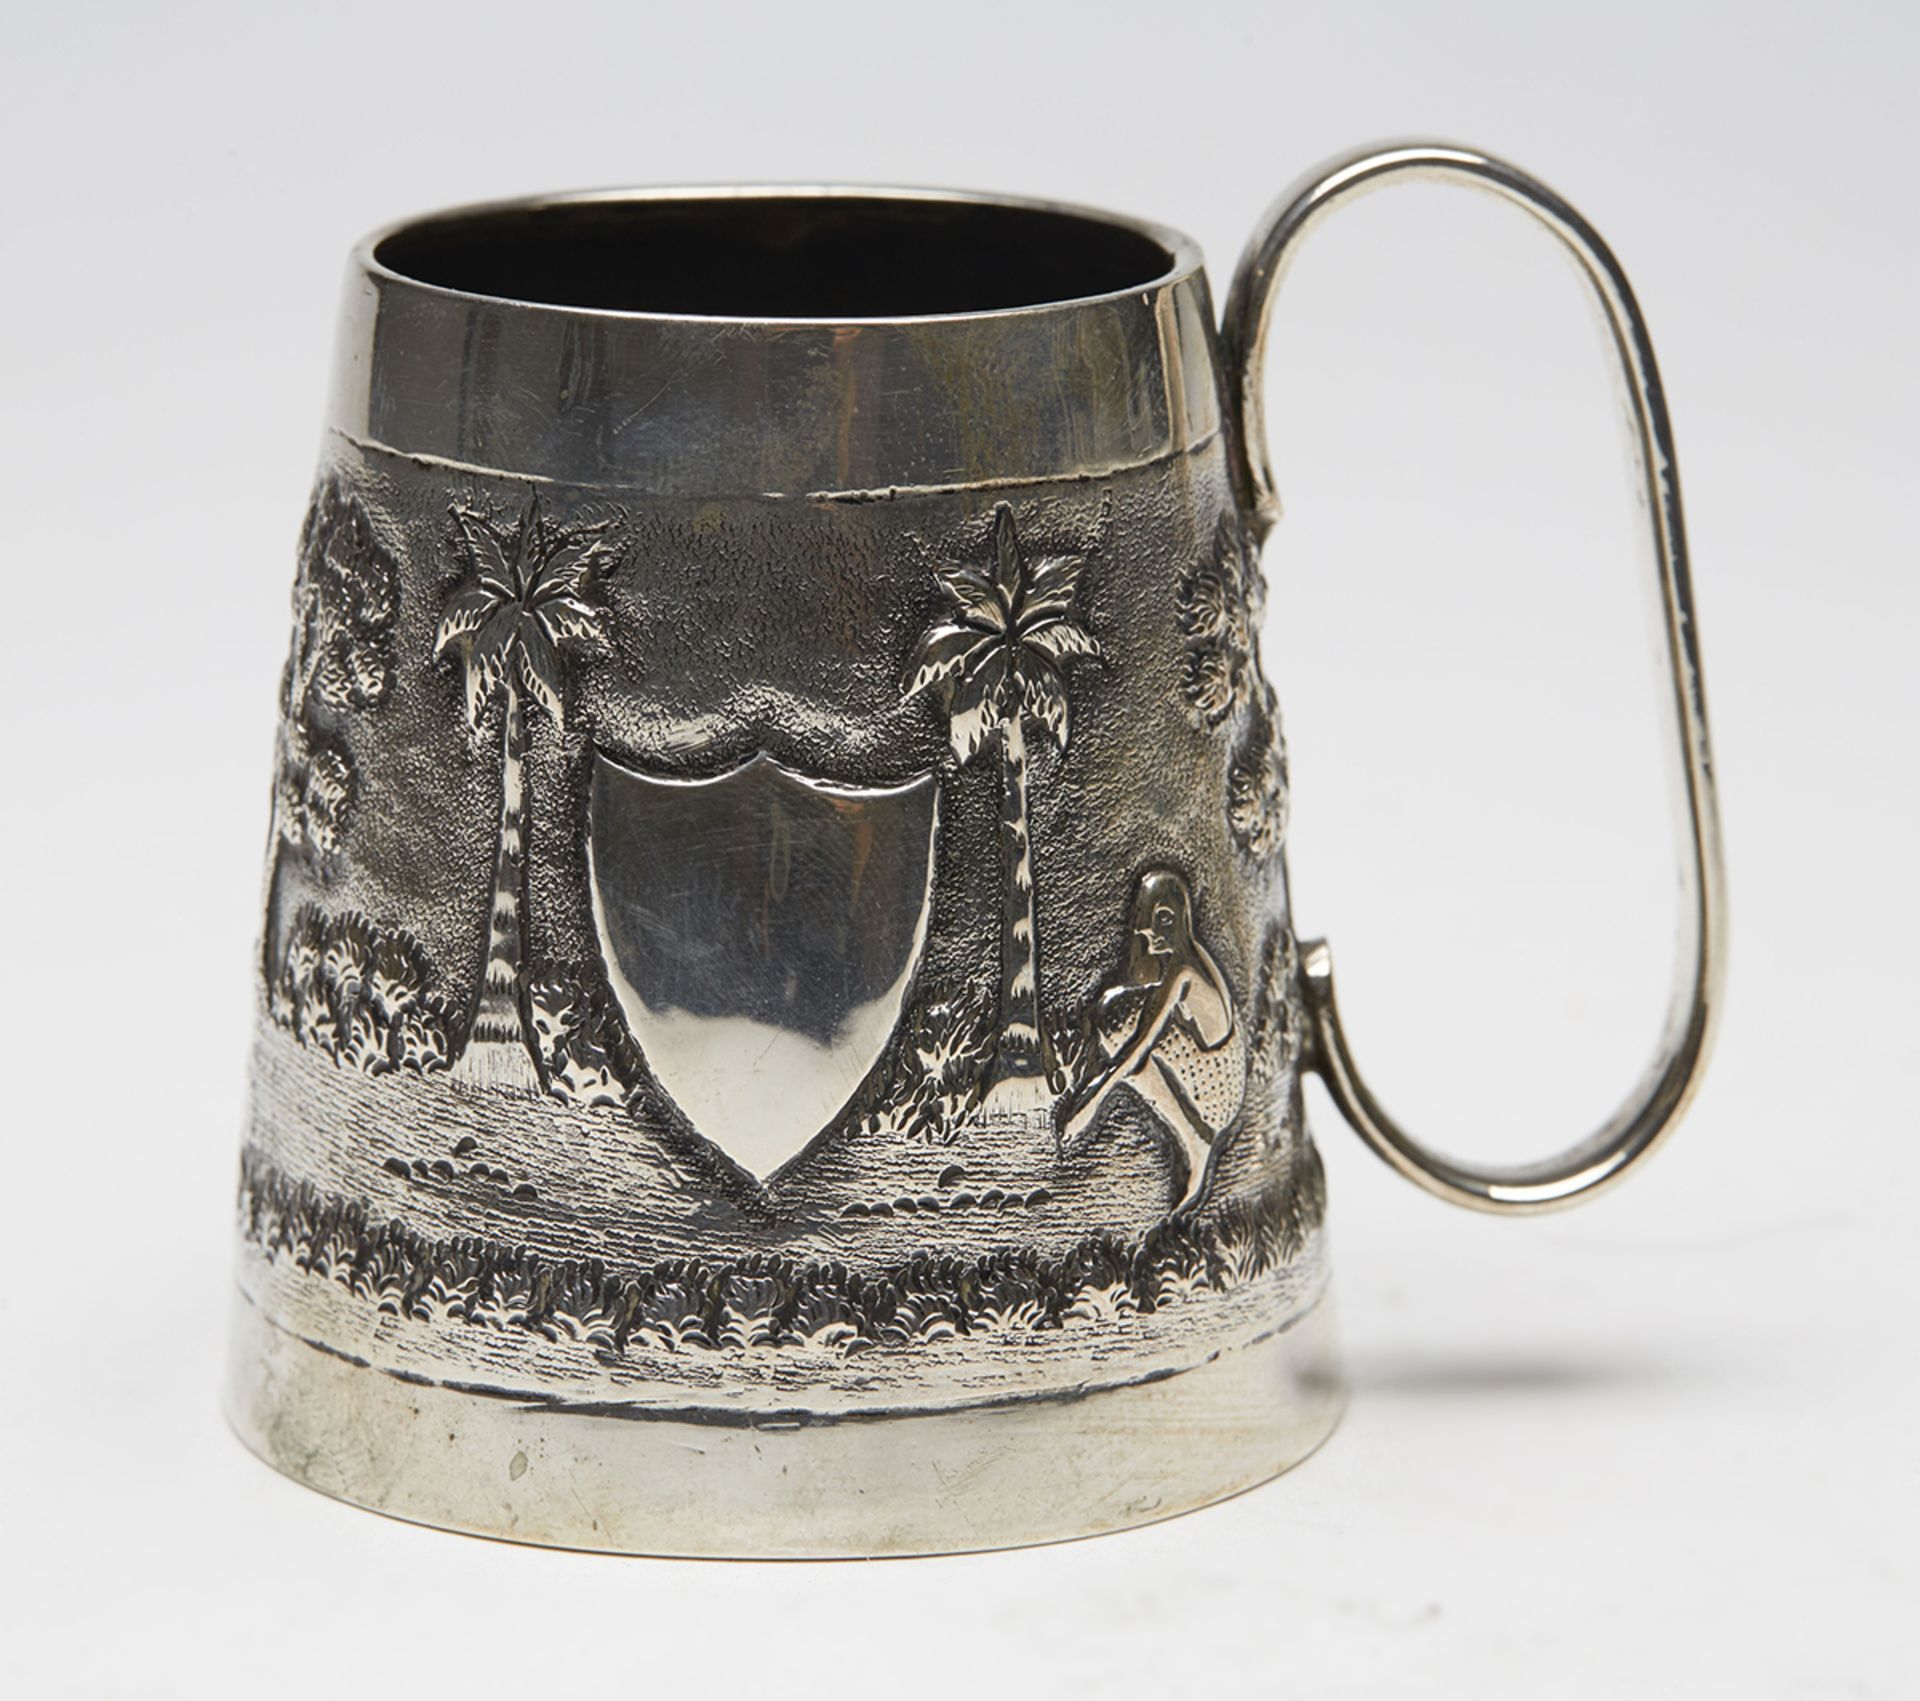 Vintage South East Asian Silver Presentation Cup 20Th C. - Image 3 of 7